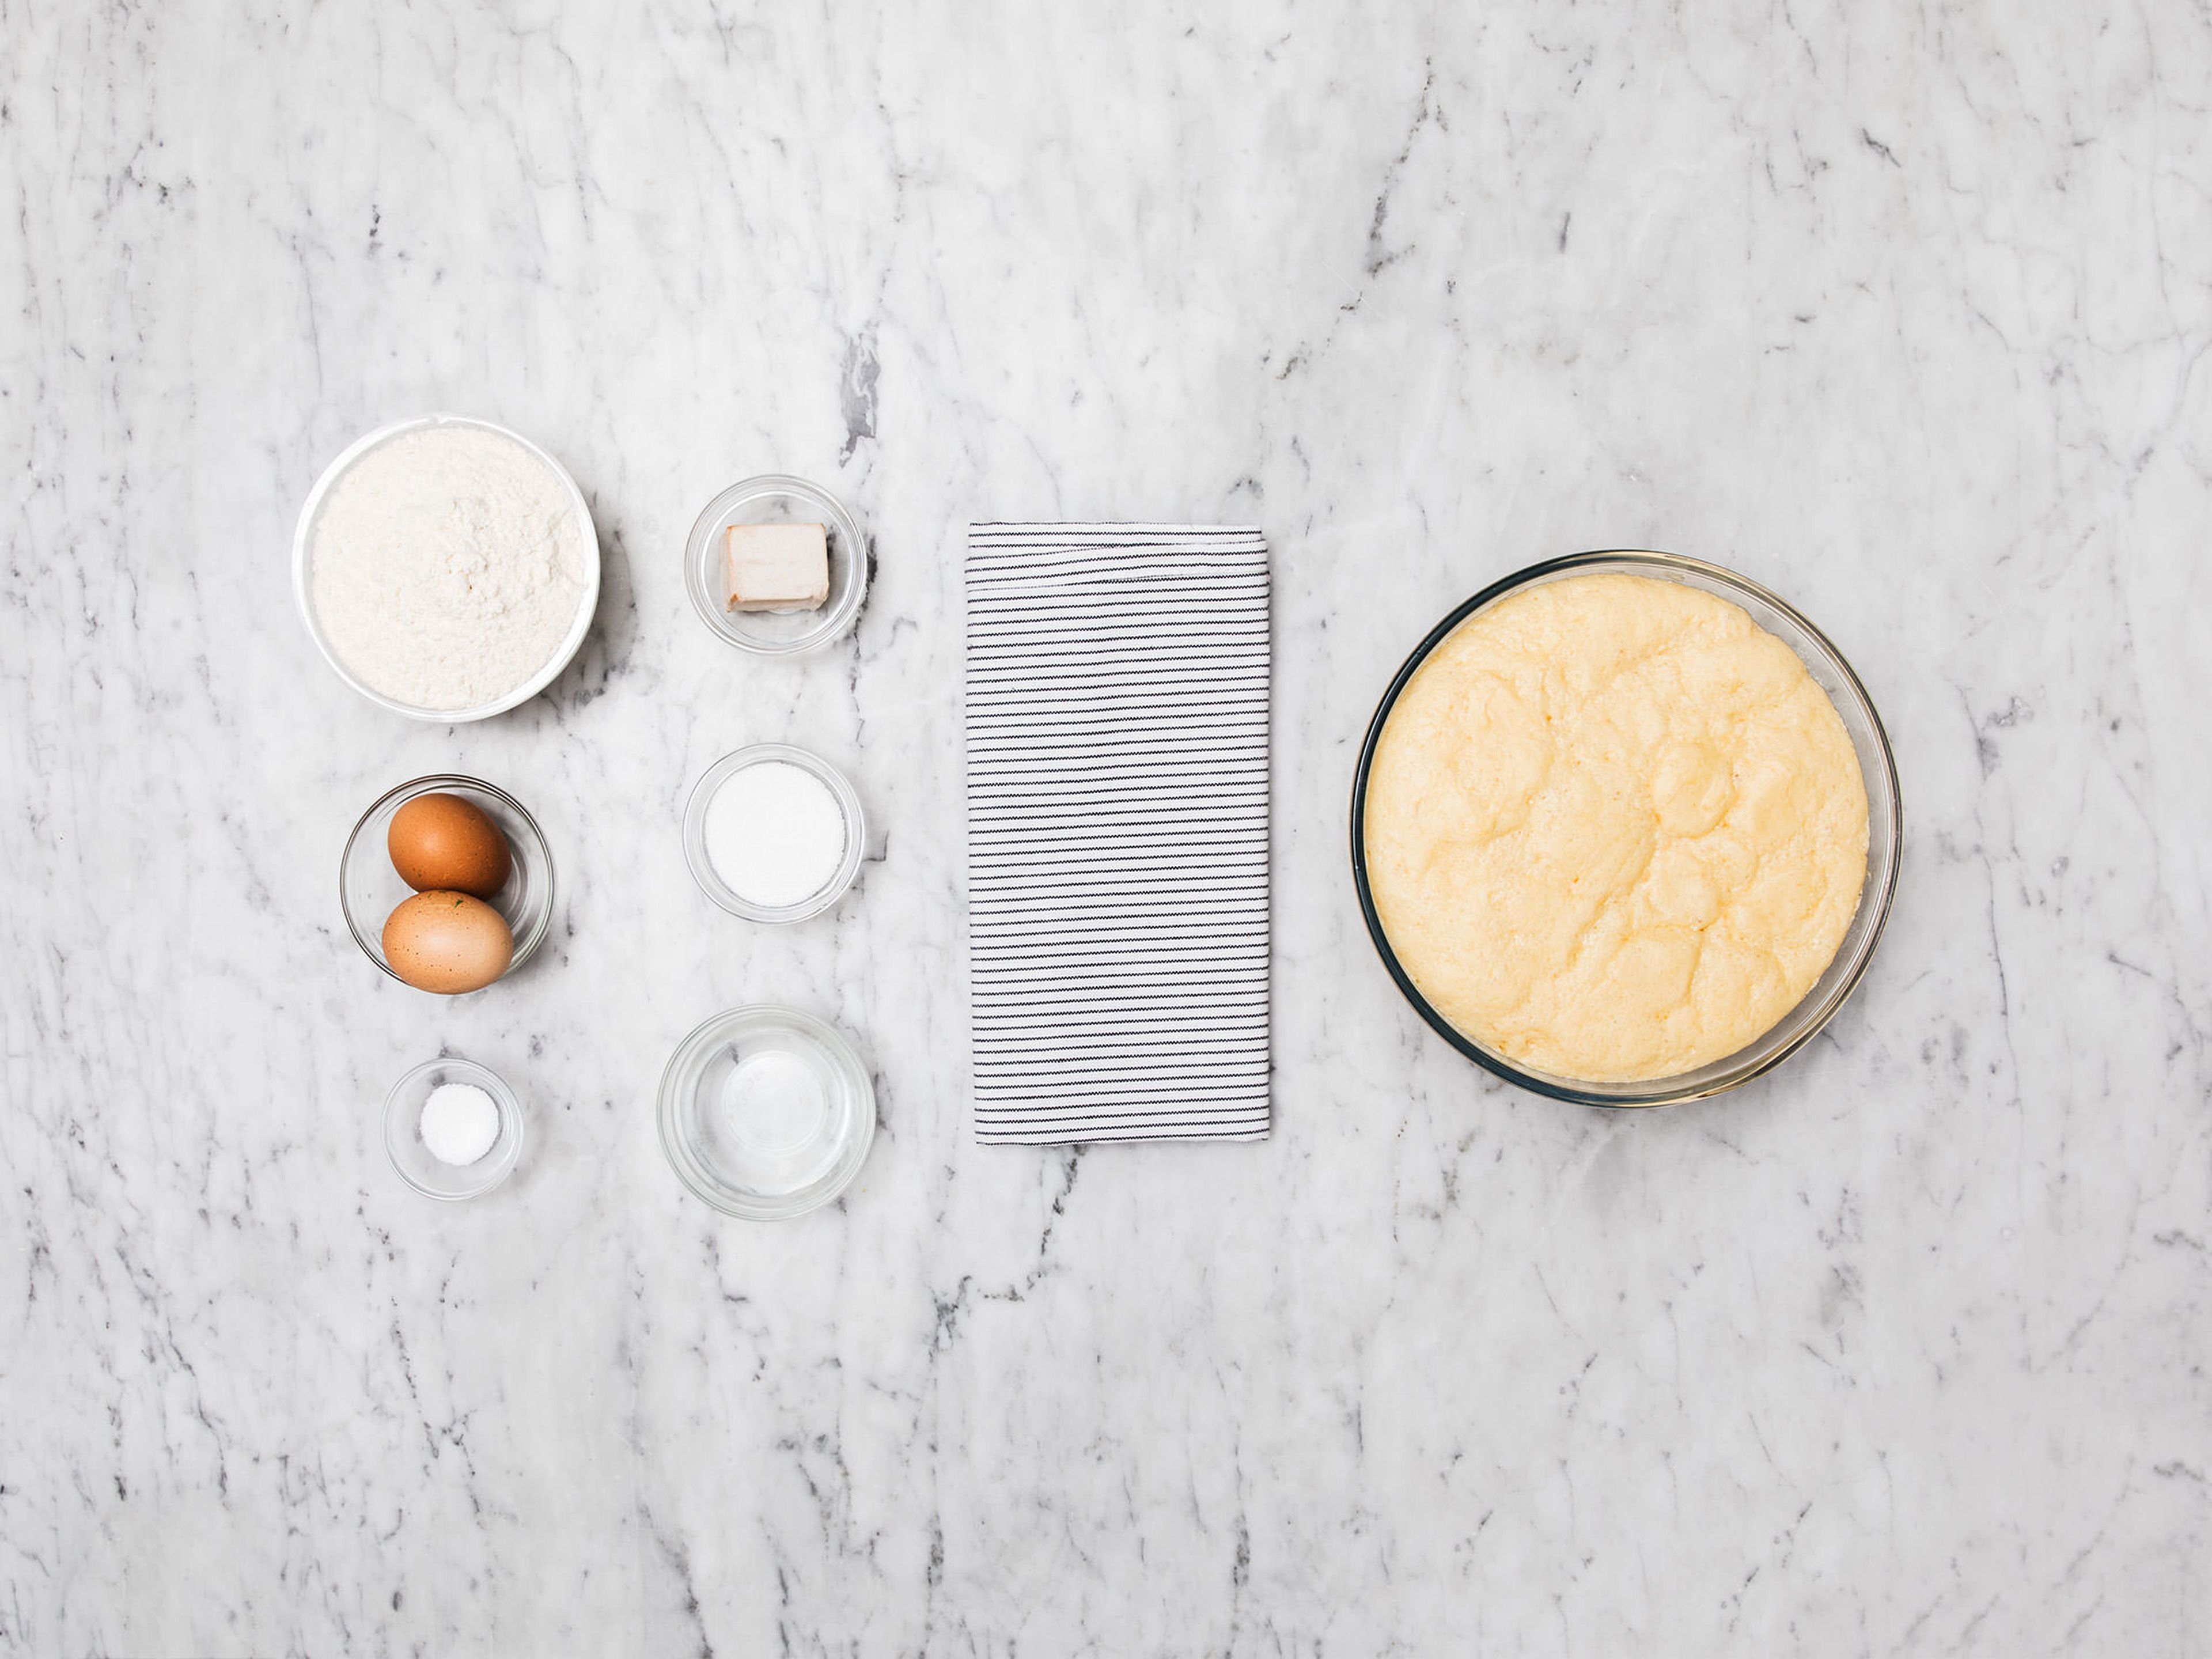 How to make yeast dough rise faster